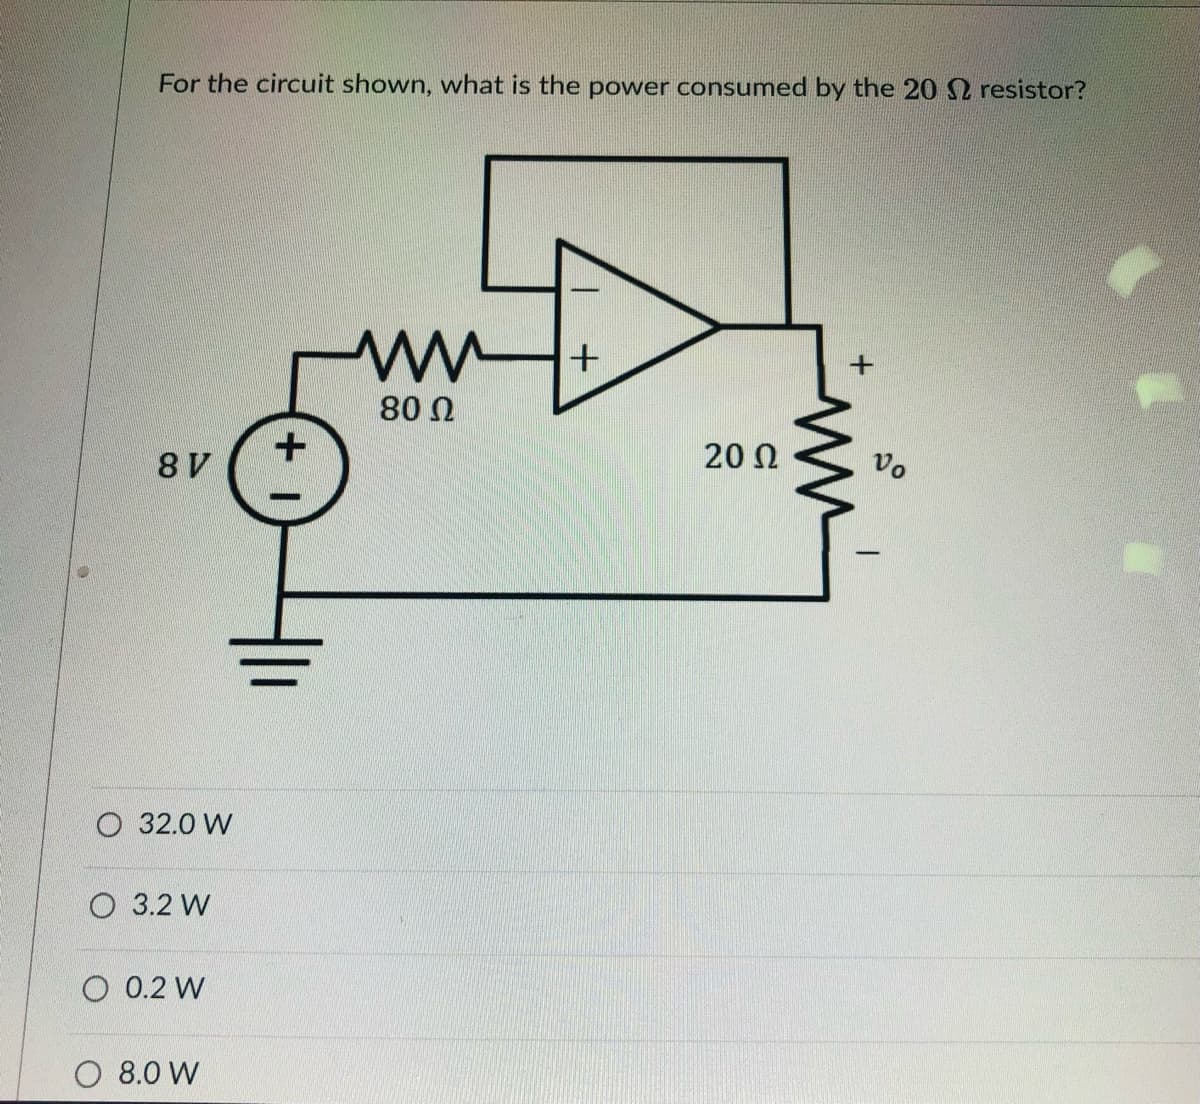 For the circuit shown, what is the power consumed by the 20 resistor?
80 0
20 N
Vo
О 32.0 W
О 3.2 W
O 0.2 W
O 8.0 W
